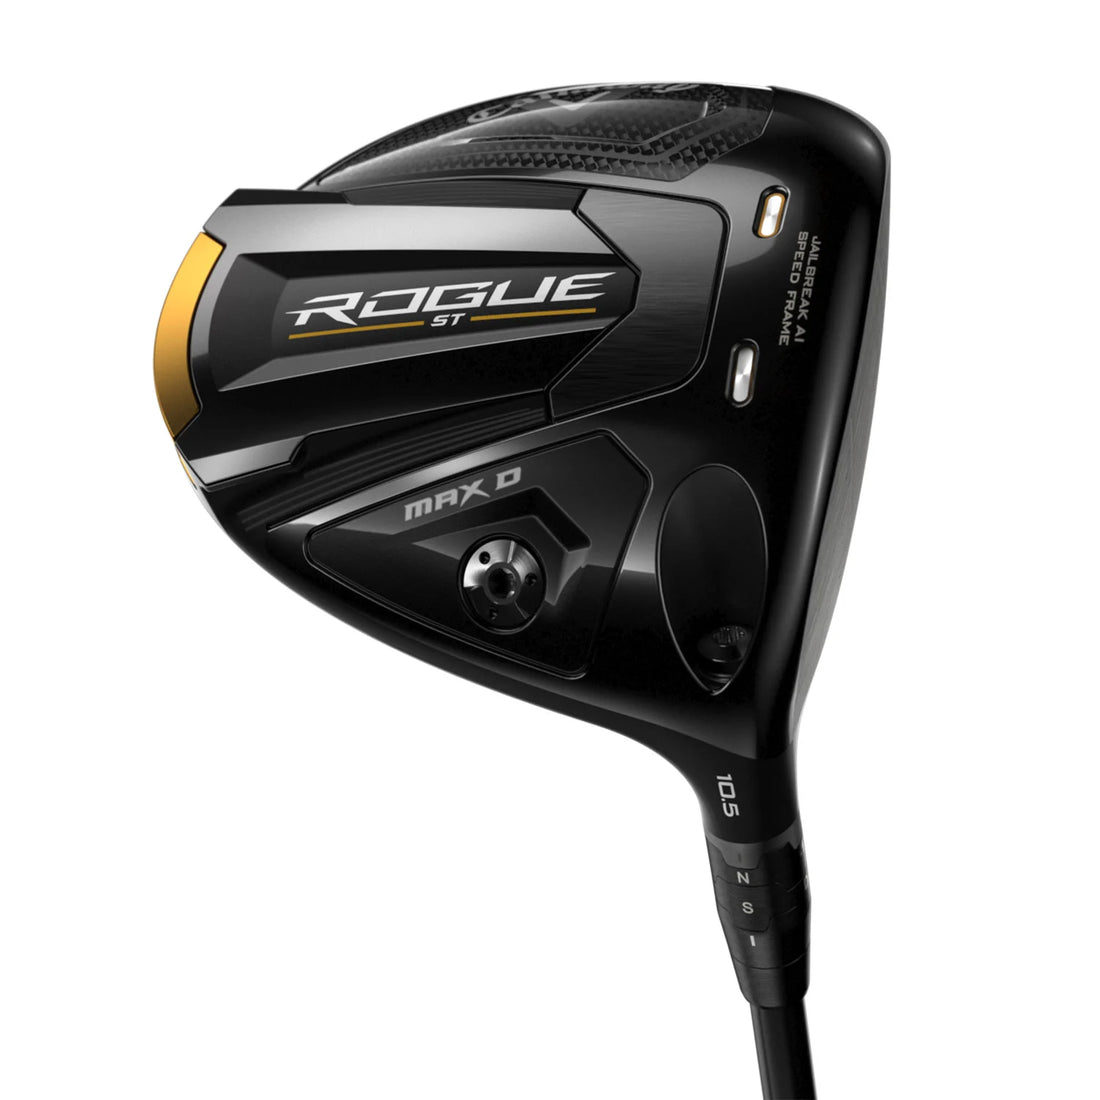 Rouge Max D Driver